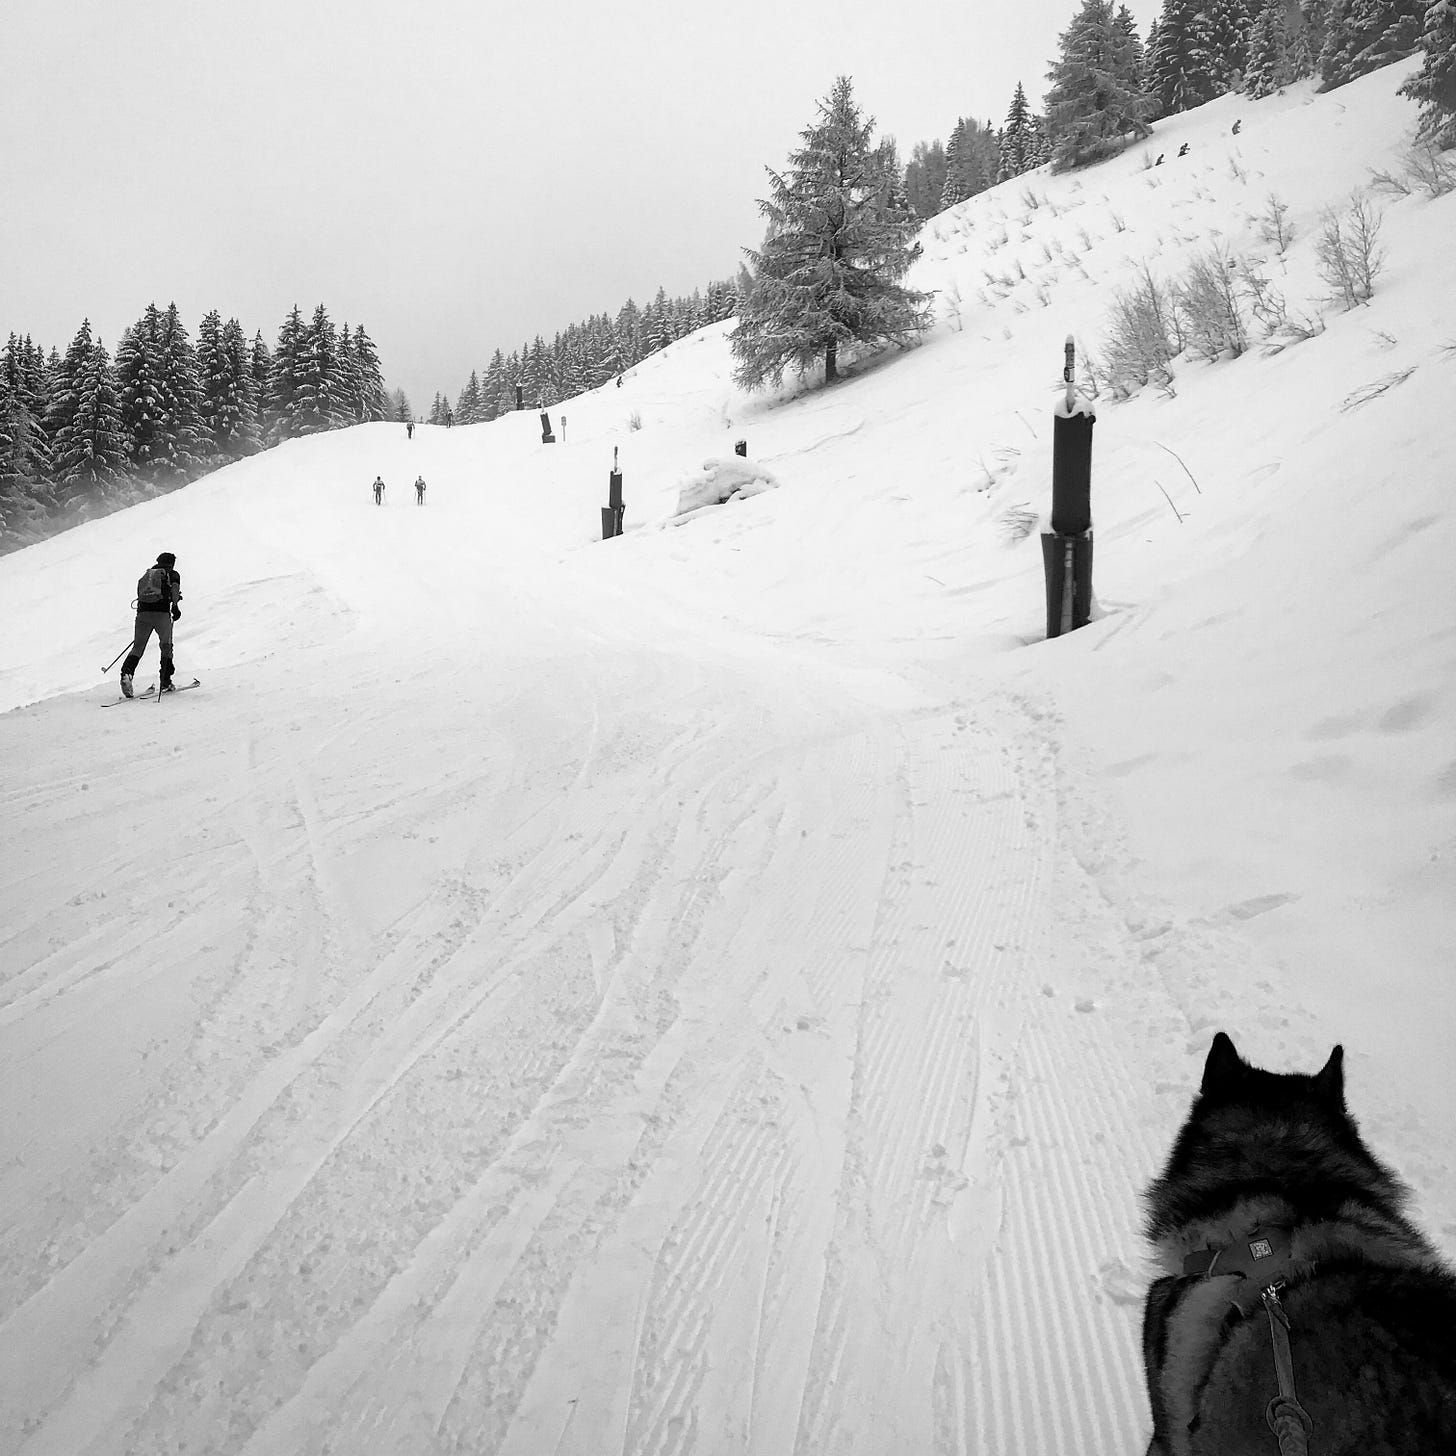 Snowy Hillside skiers walking up the hill. Black and white image. 